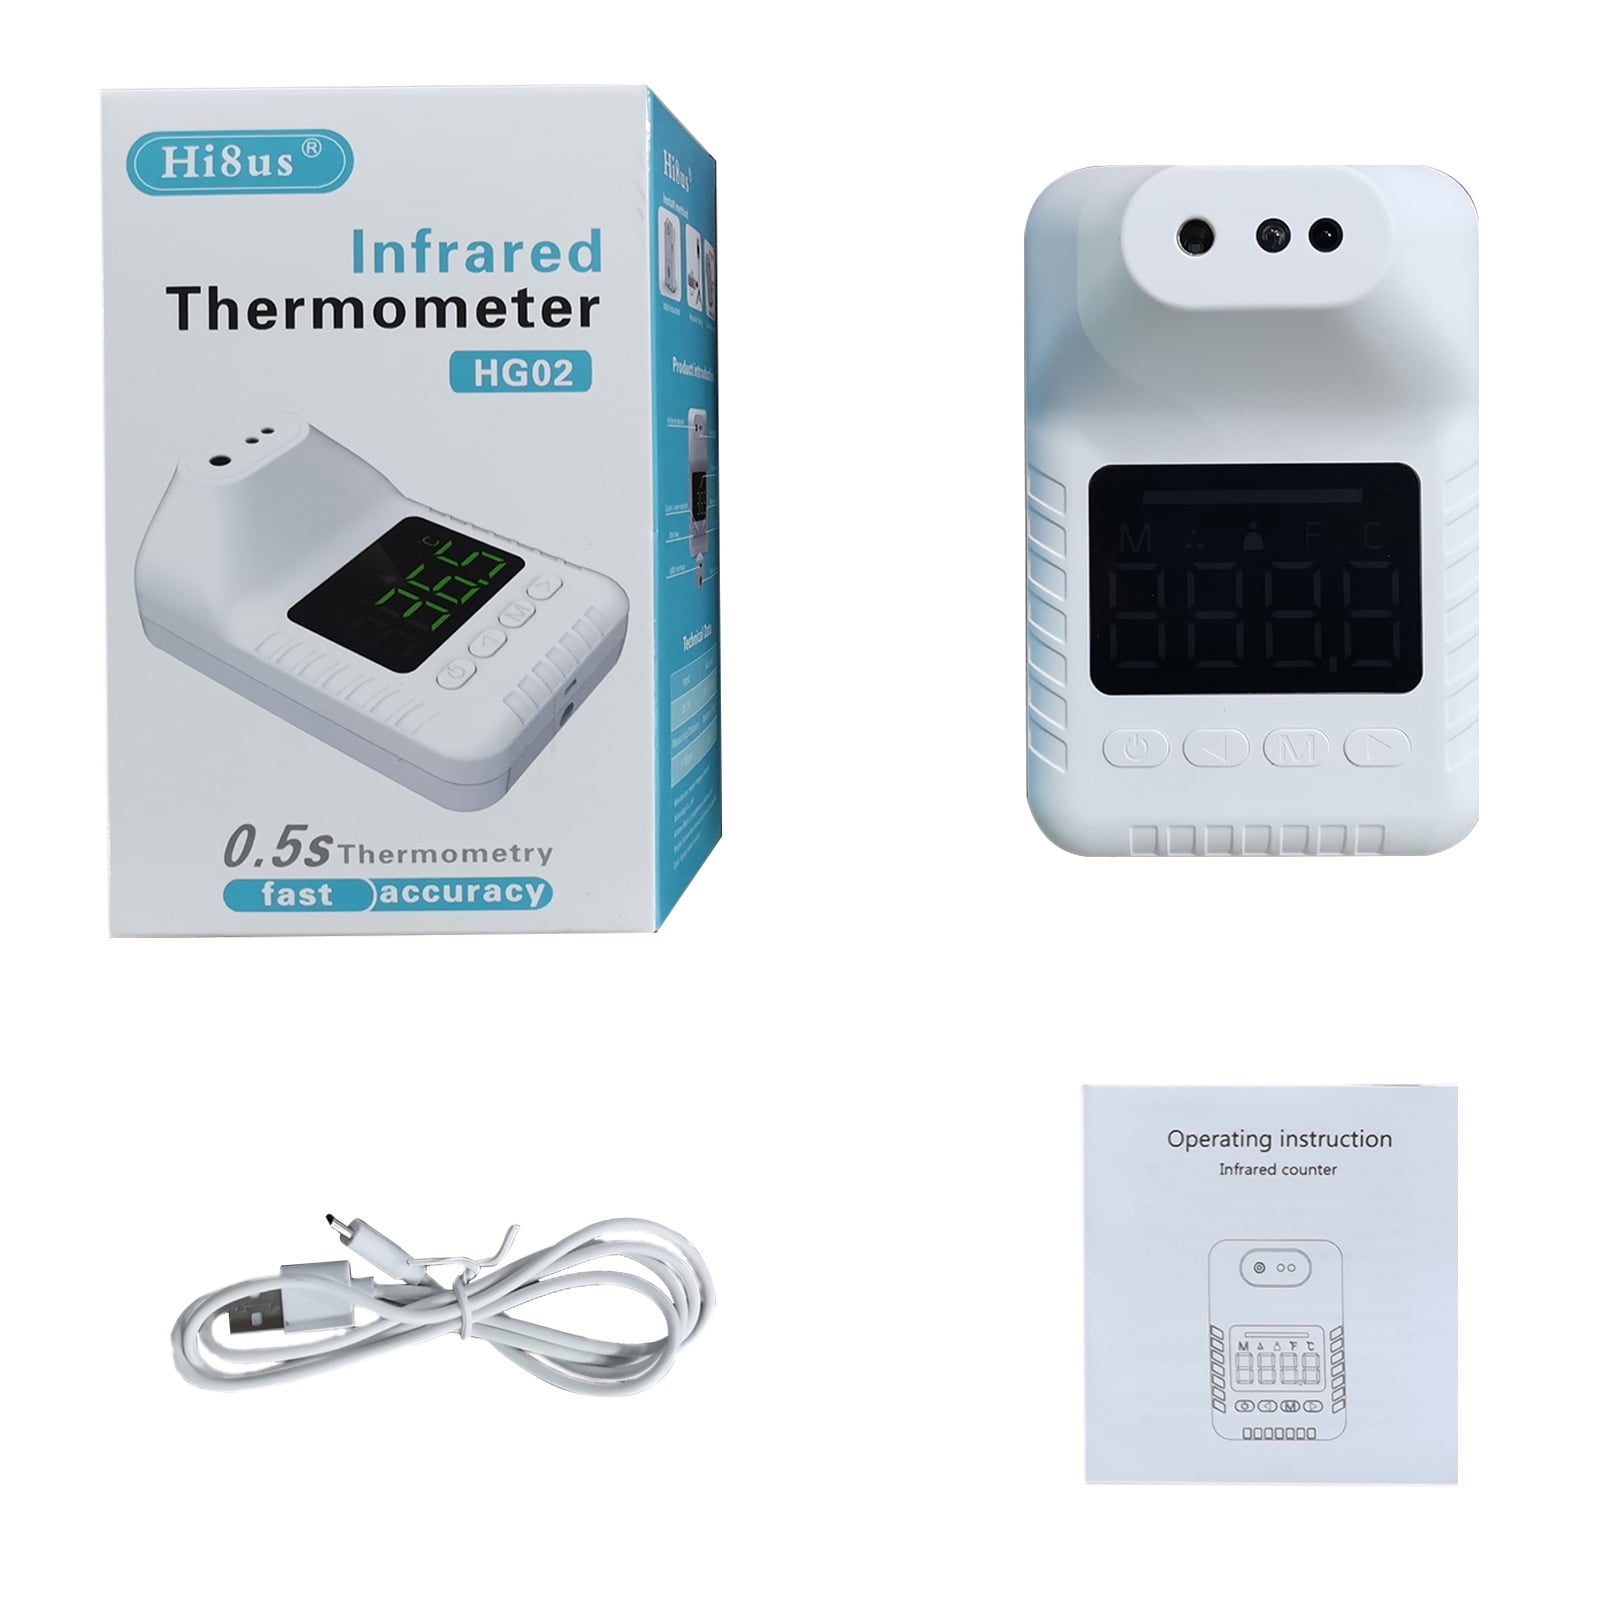 Digital Thermometer Infrared Distance hi8us Measure Temperature Fever 